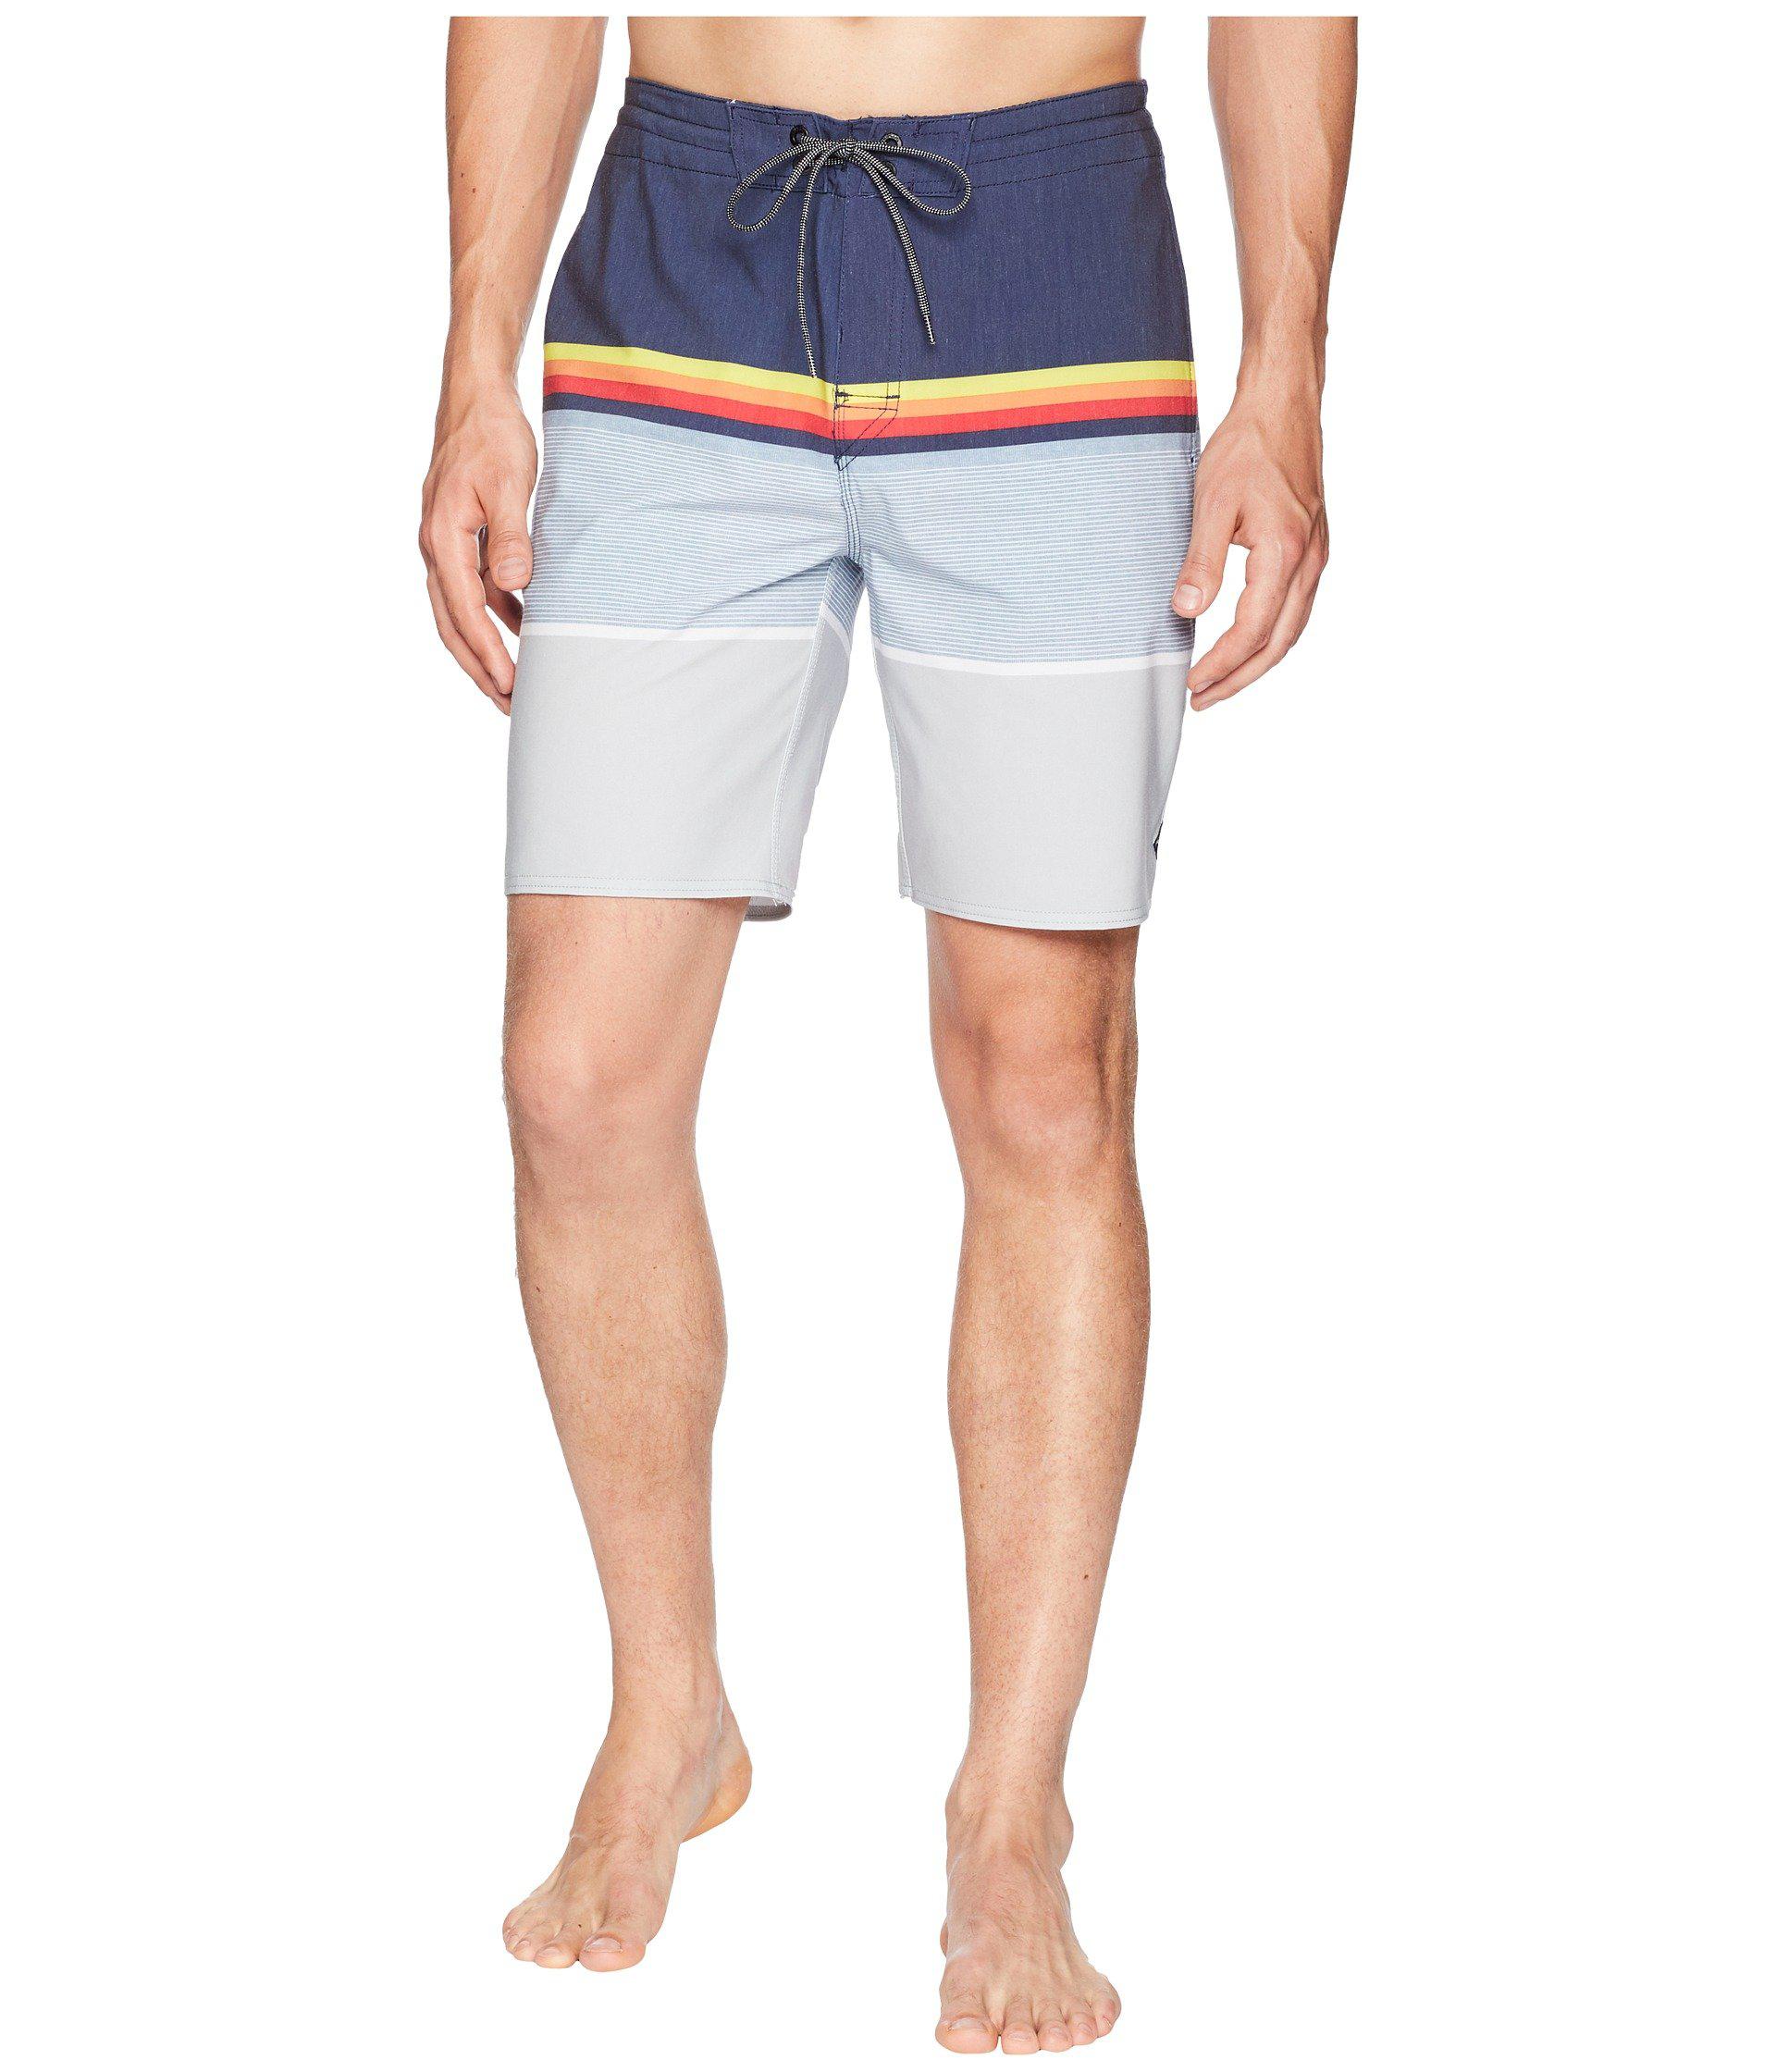 Lyst - Rip Curl Rapture Layday Boardshorts in Blue for Men